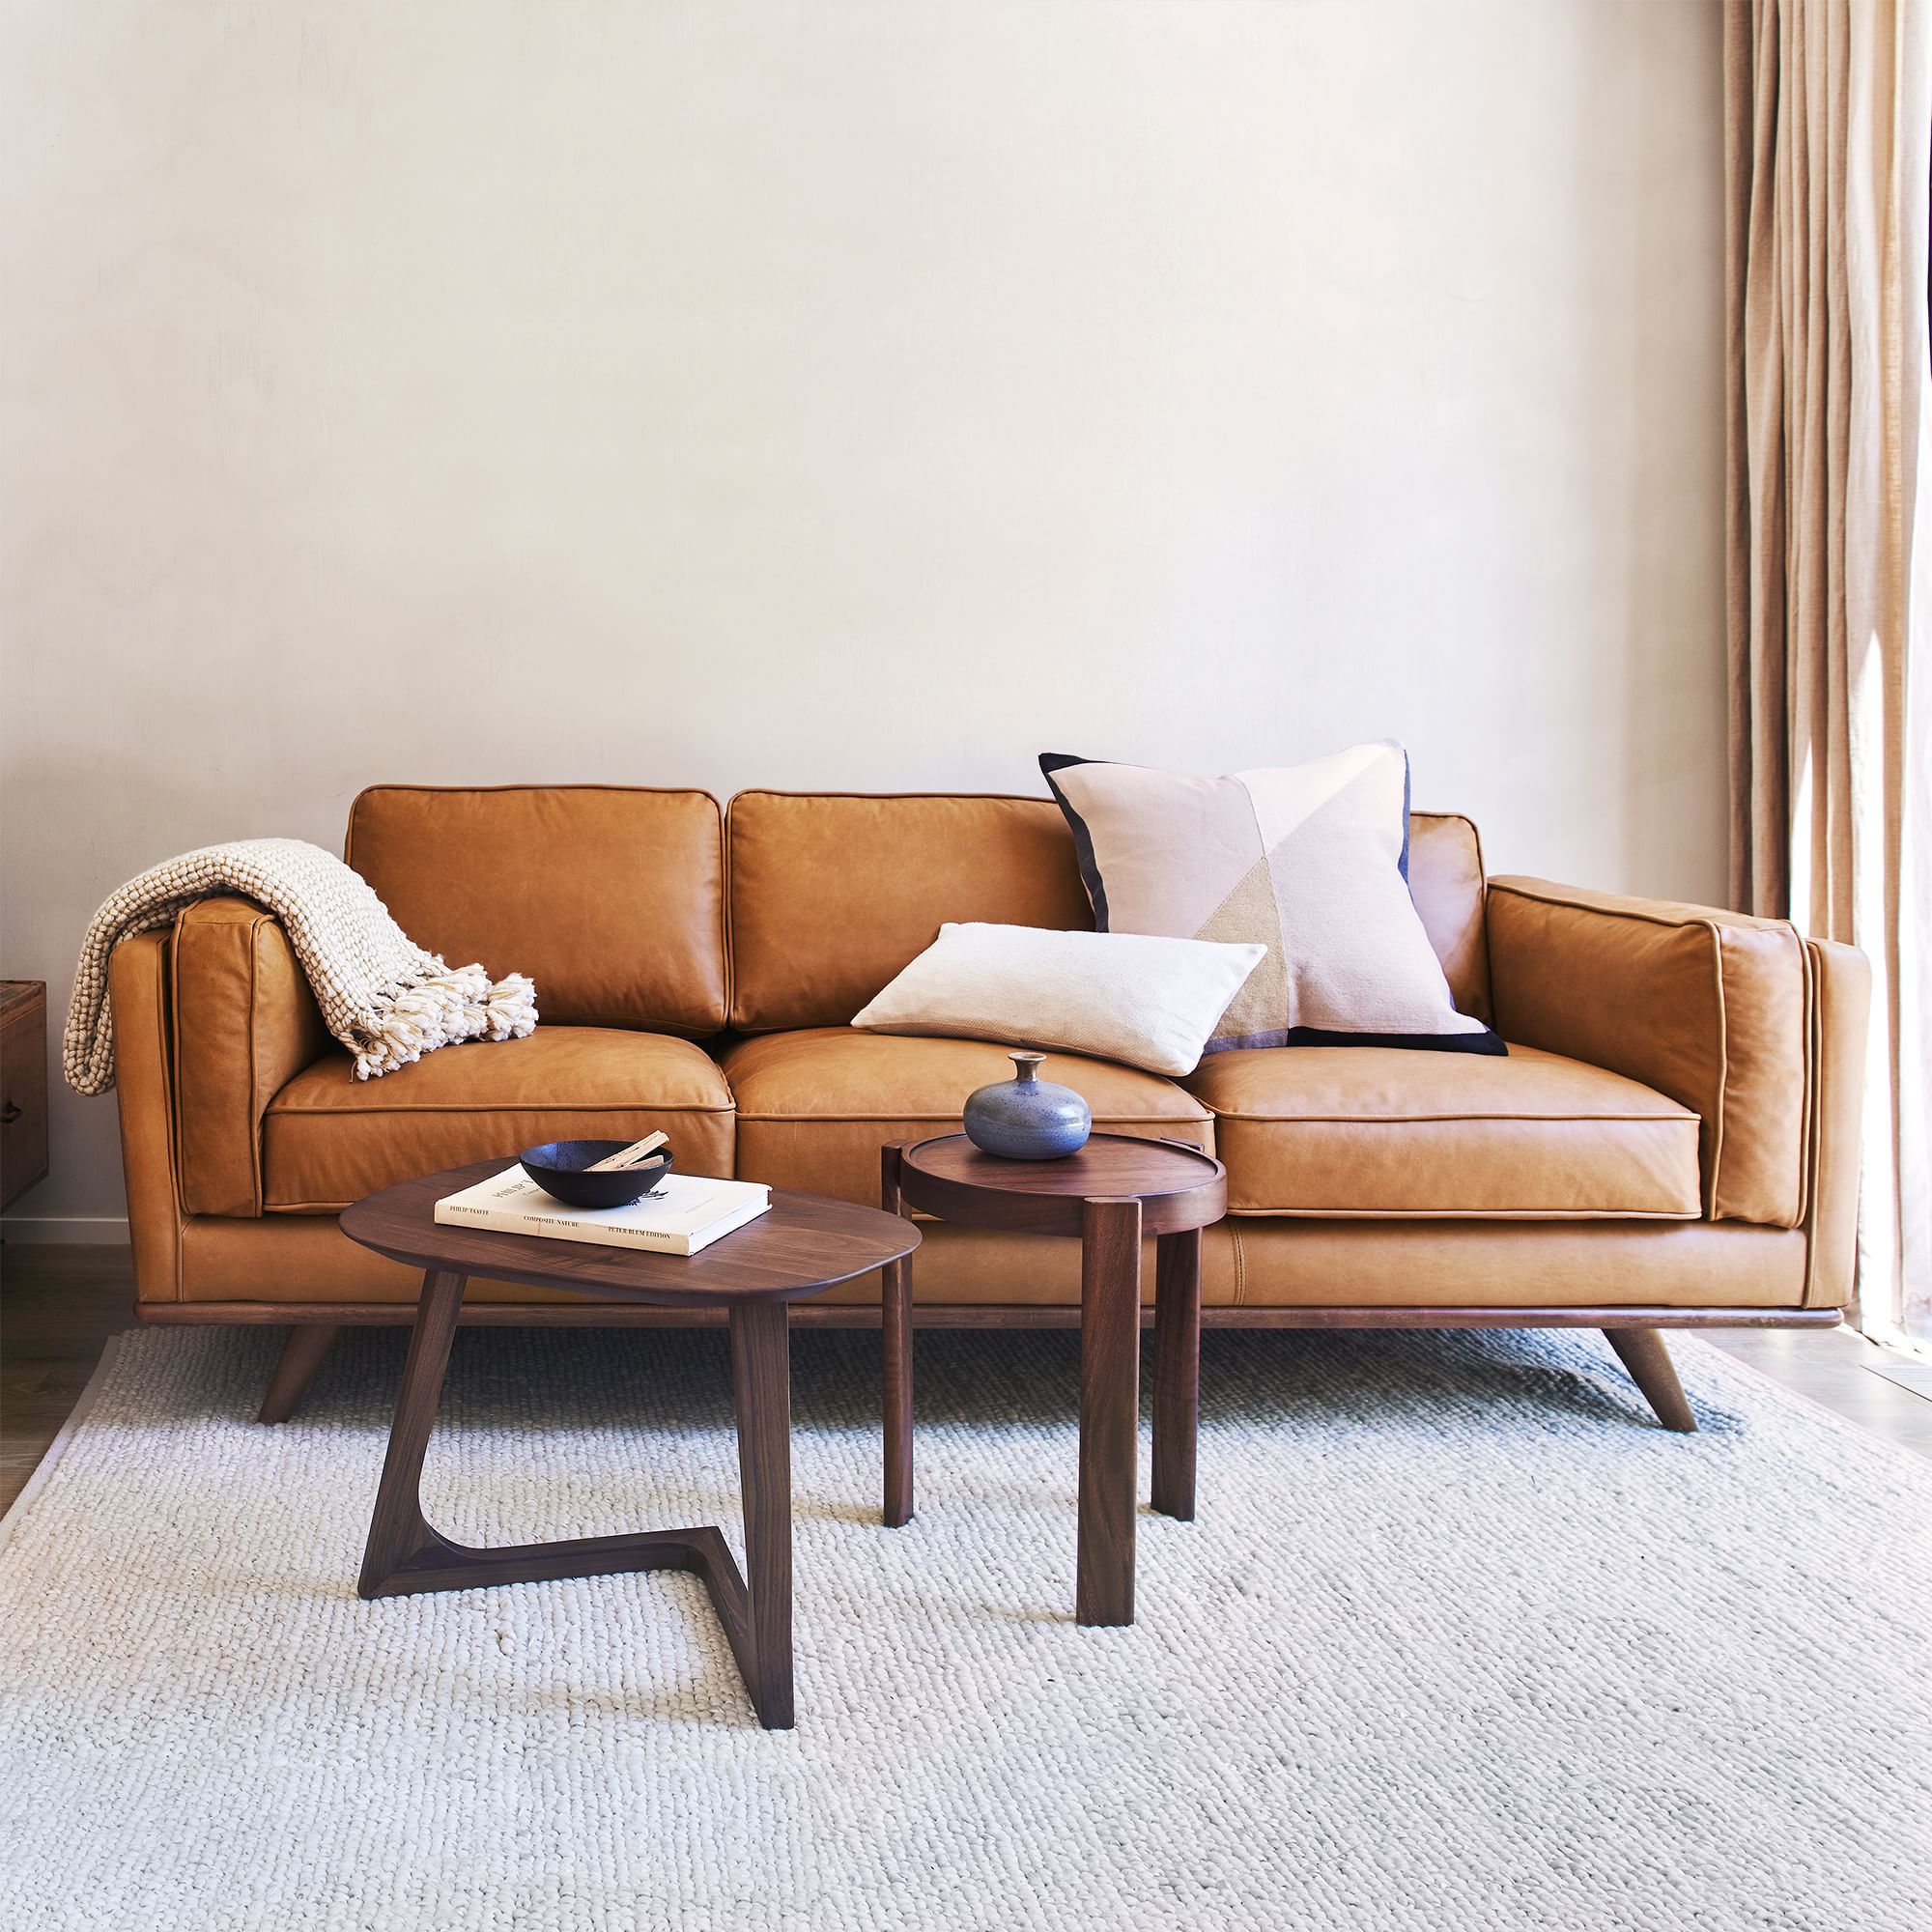 I'm a home expert - how to stop your sofa cushions sliding off